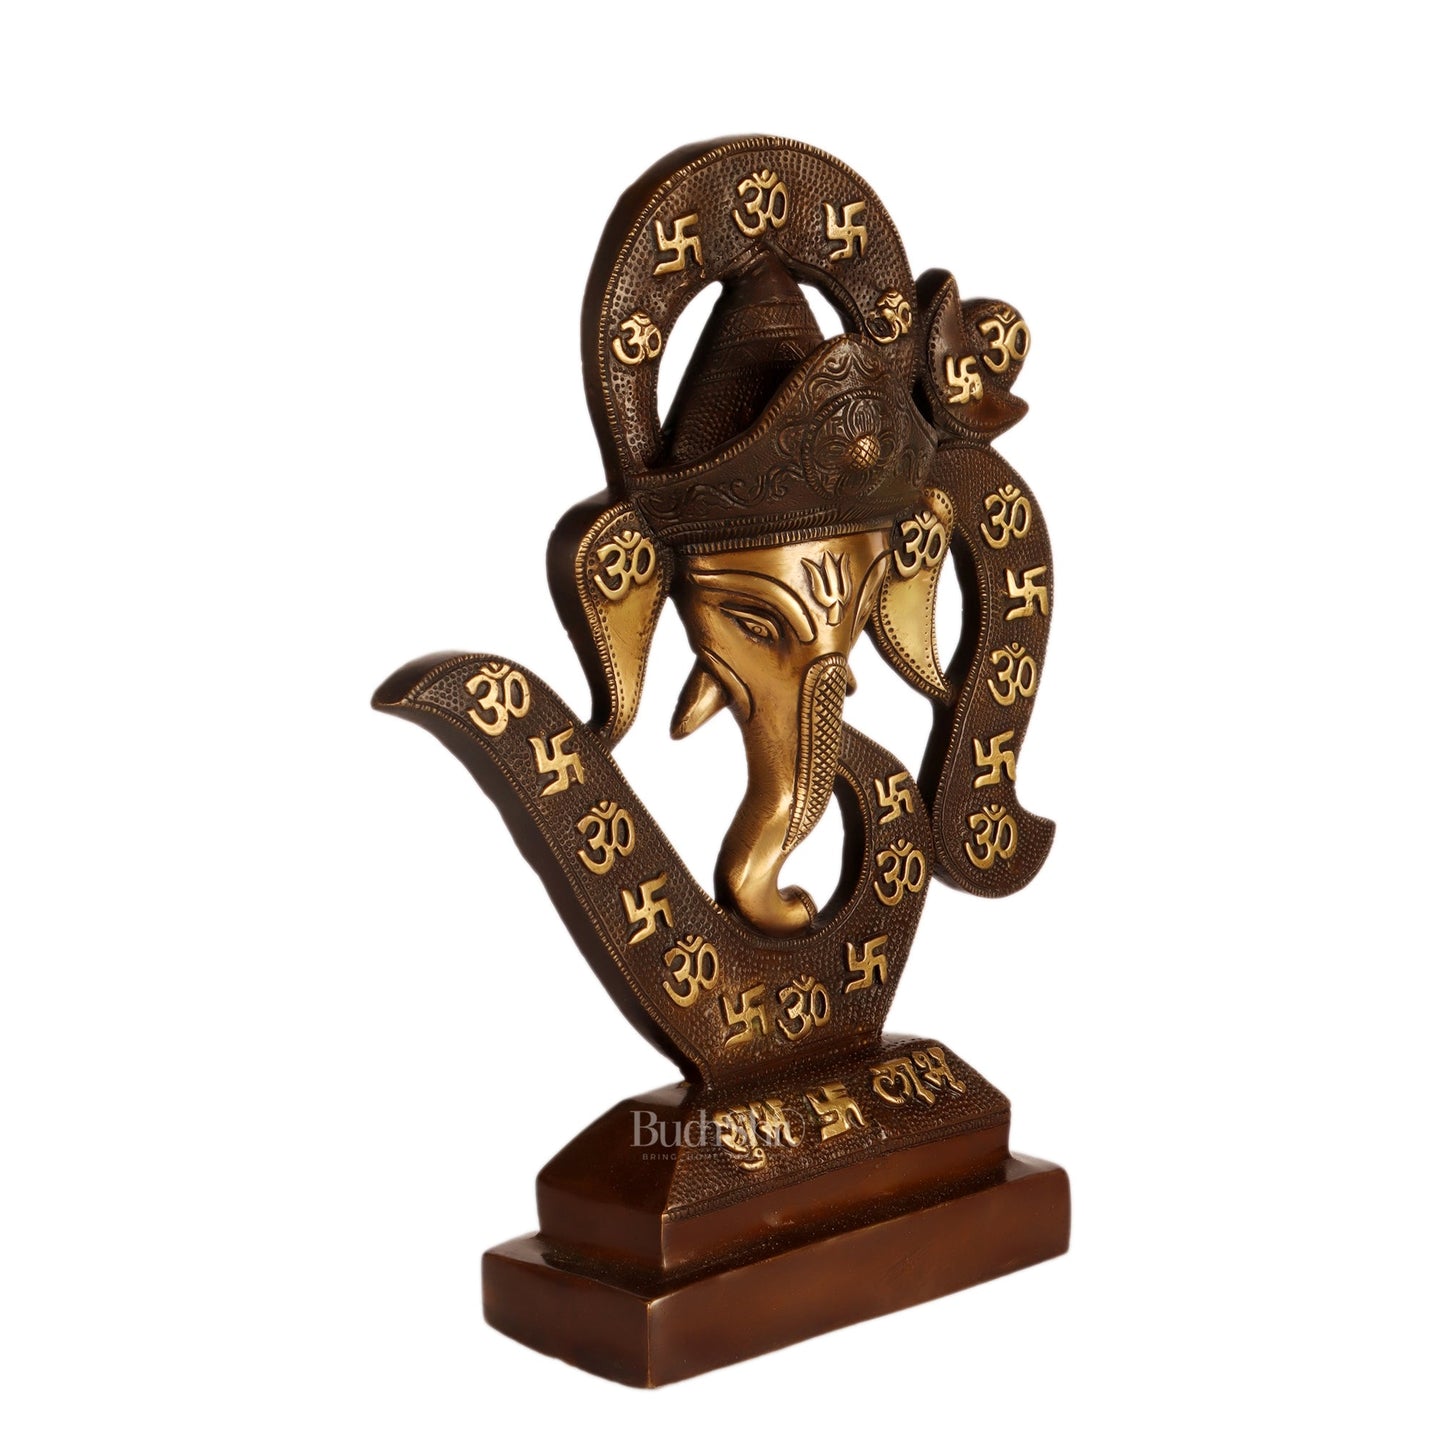 Brass Big Ganesha face on Om table accent Brown and golden 13" - Budhshiv.com